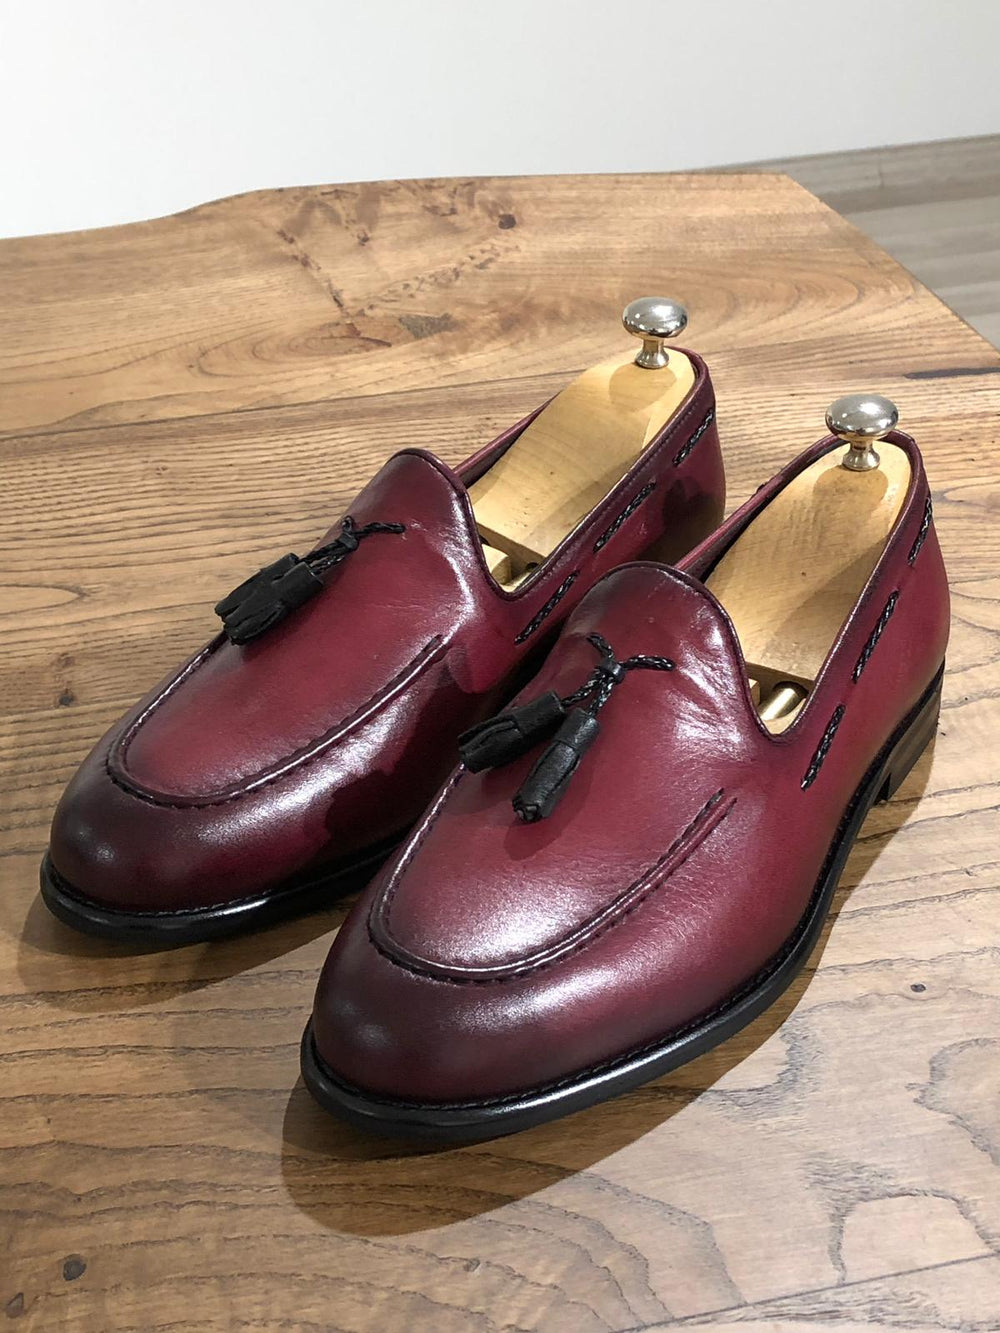 Tasseled Leather Claret Red Loafers - MENSTYLEWITH